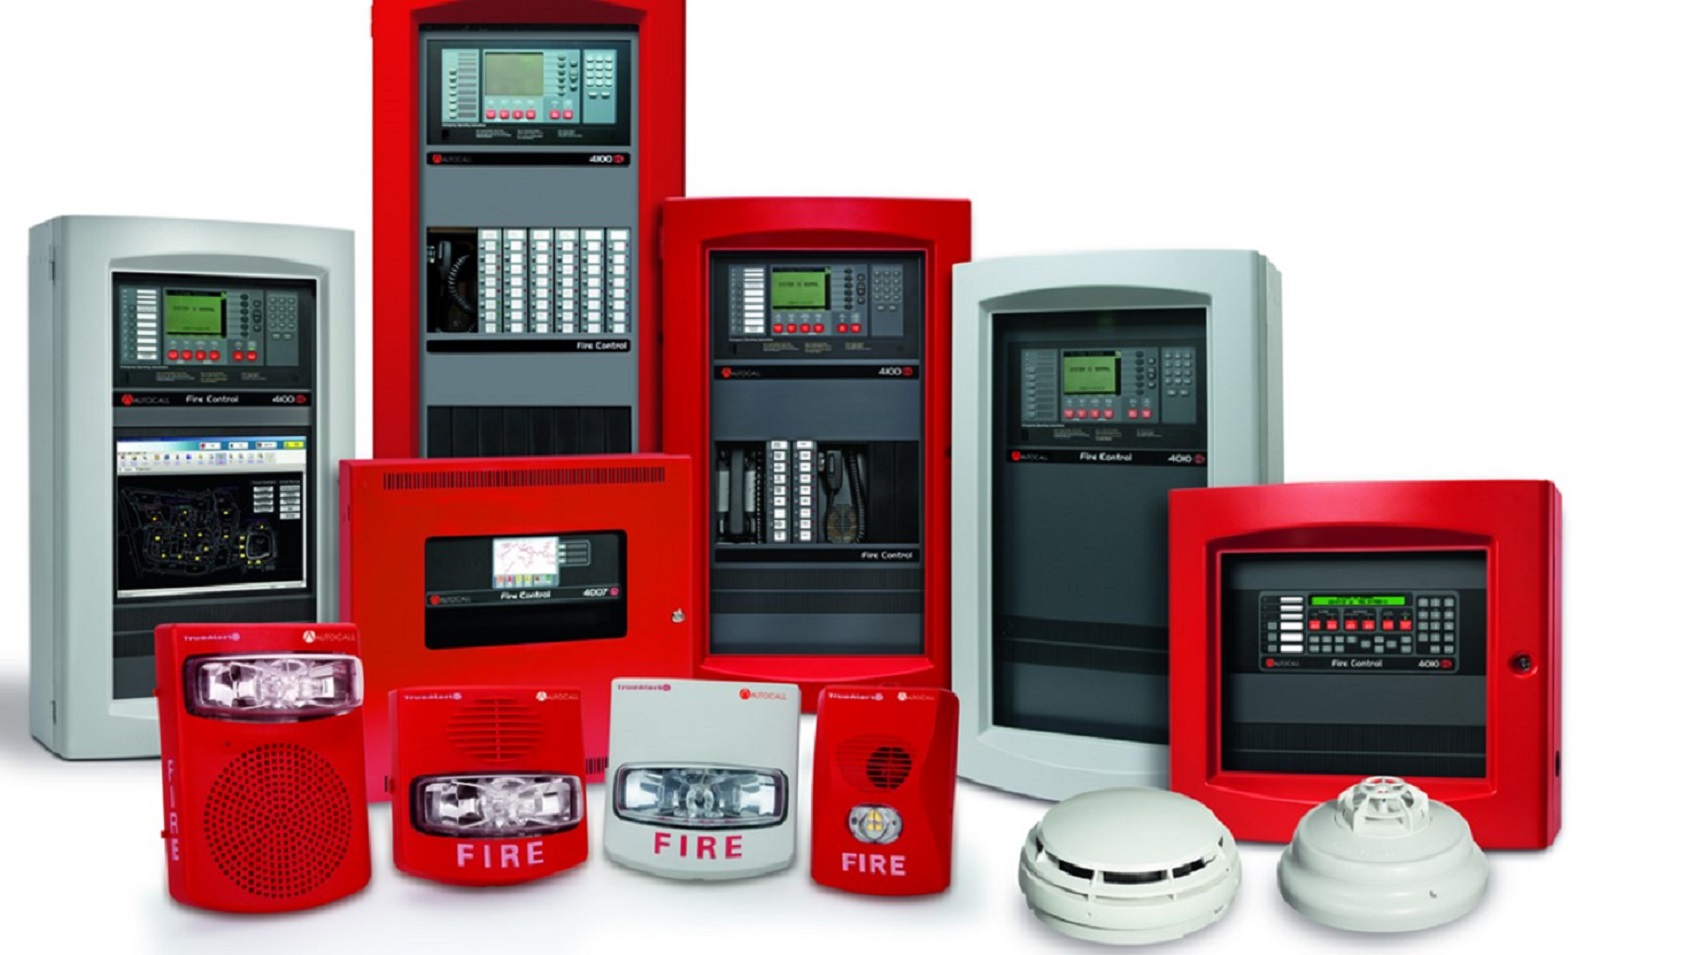 Conventional Or Addressable Fire Alarm System? | atelier-yuwa.ciao.jp